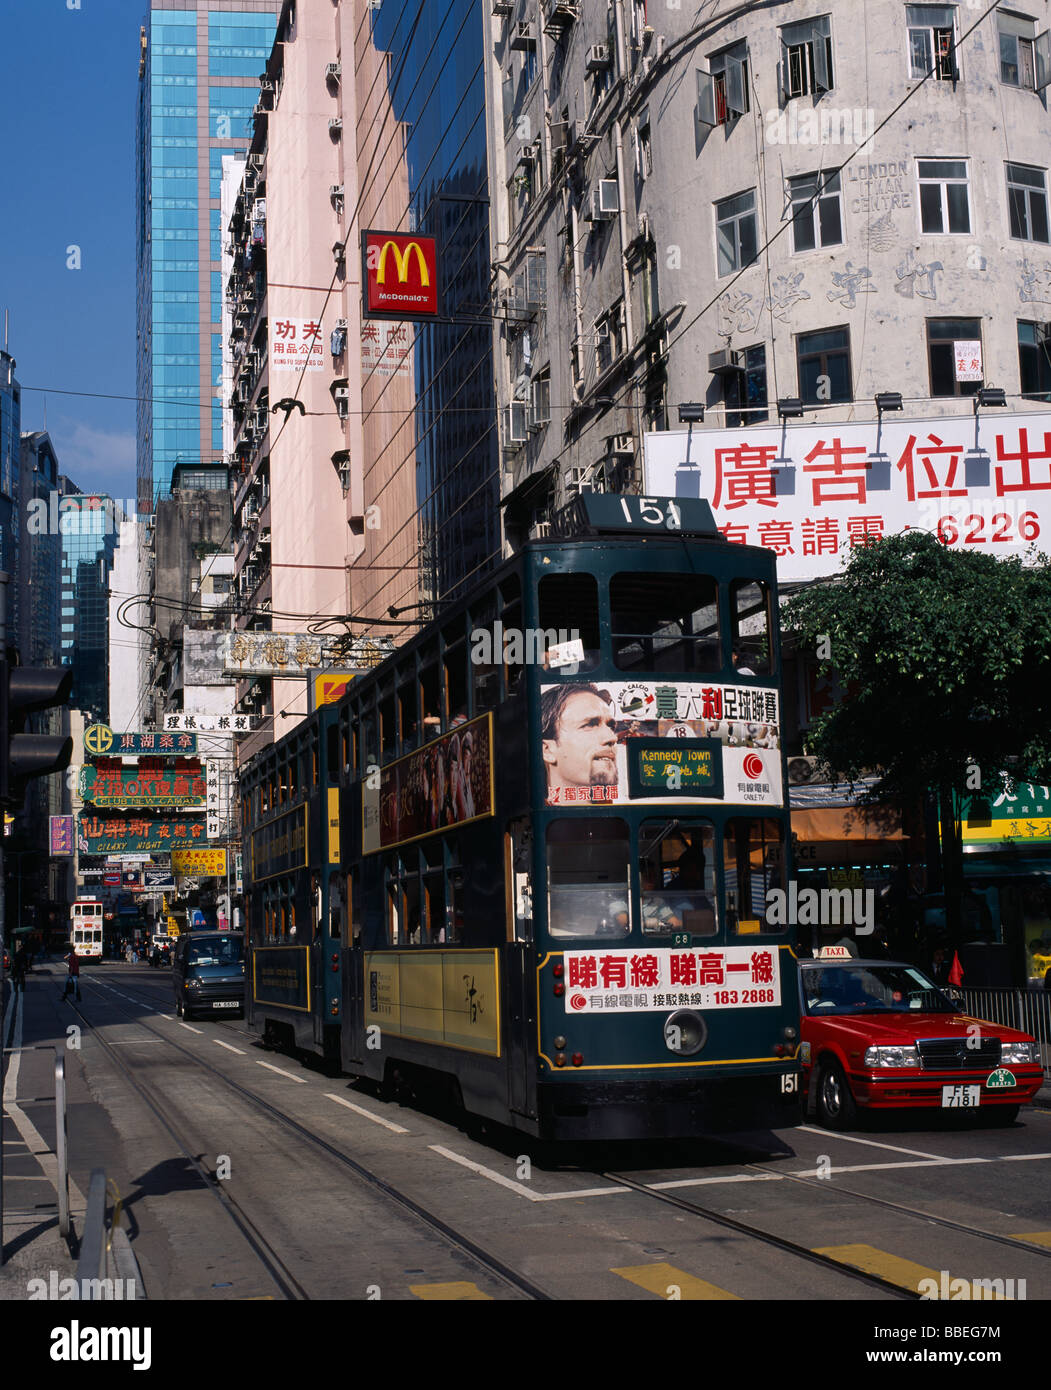 CHINA Hong Kong Island tram on busy city street with high rise buildings and advertising hoardings. Sign for McDonalds above Stock Photo